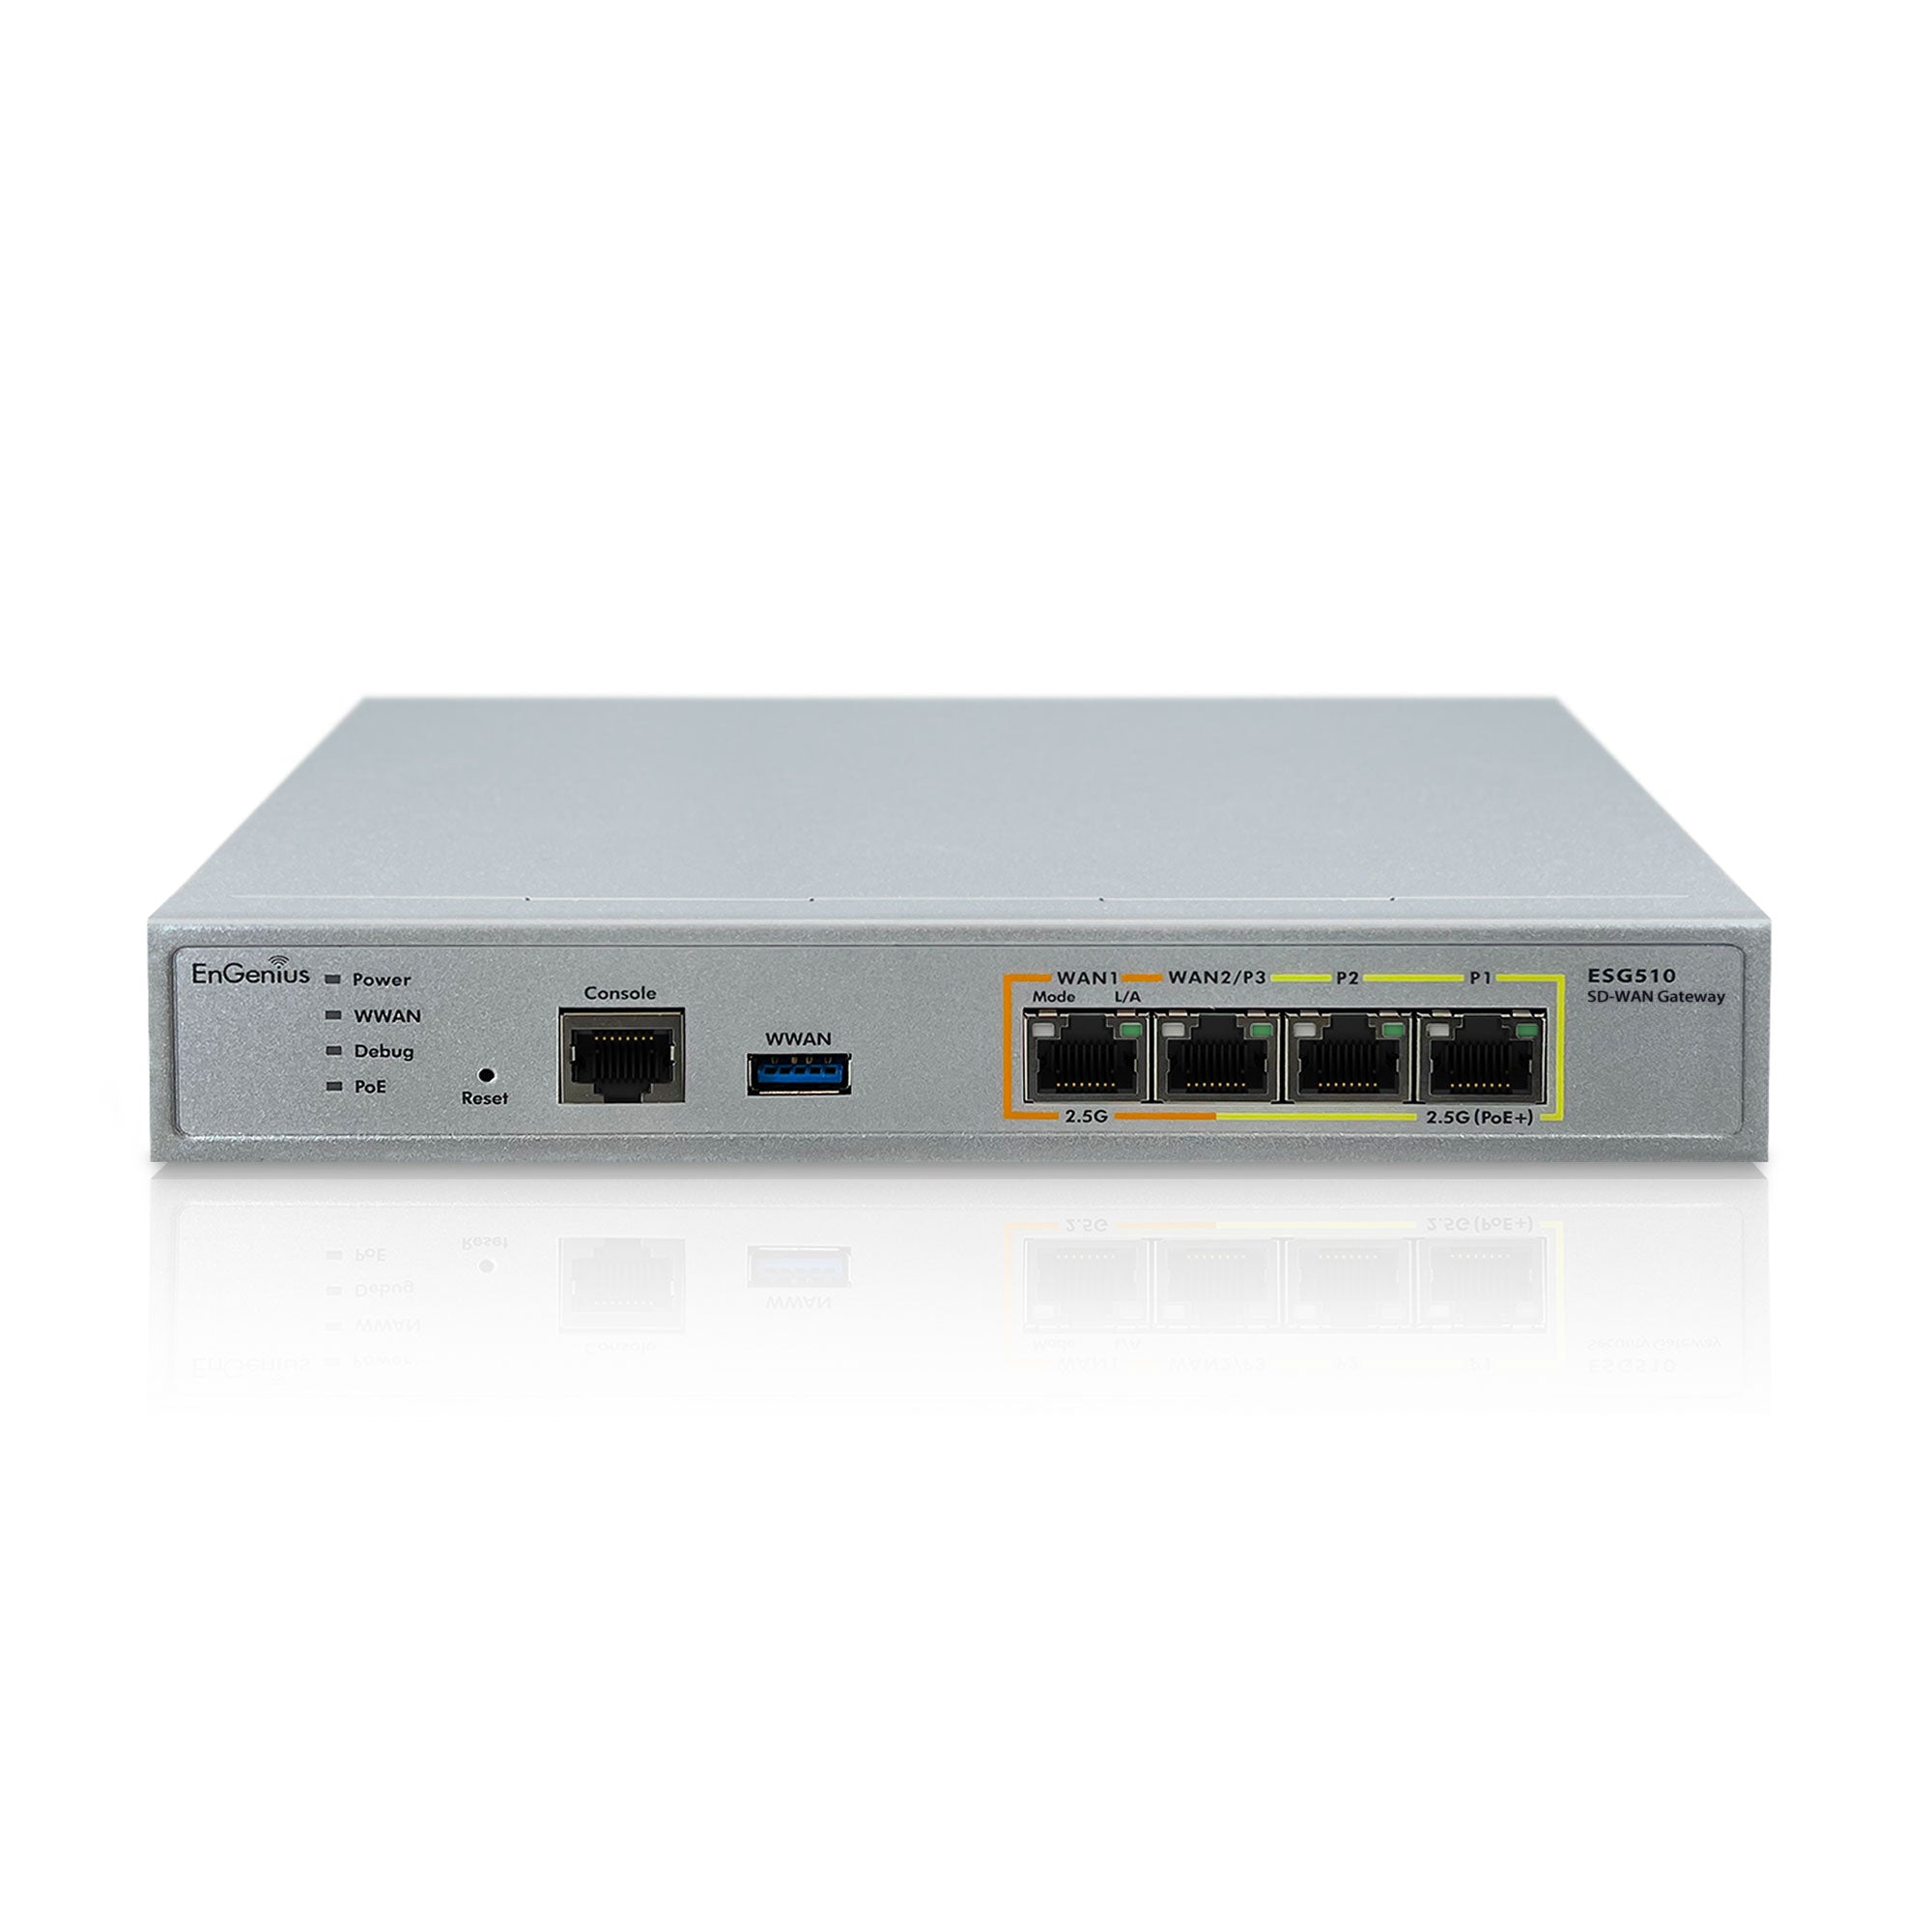 ESG510: Cloud Managed SD-WAN Security Gateway with Quad Core 1.6GHz and 4x 2.5G ports